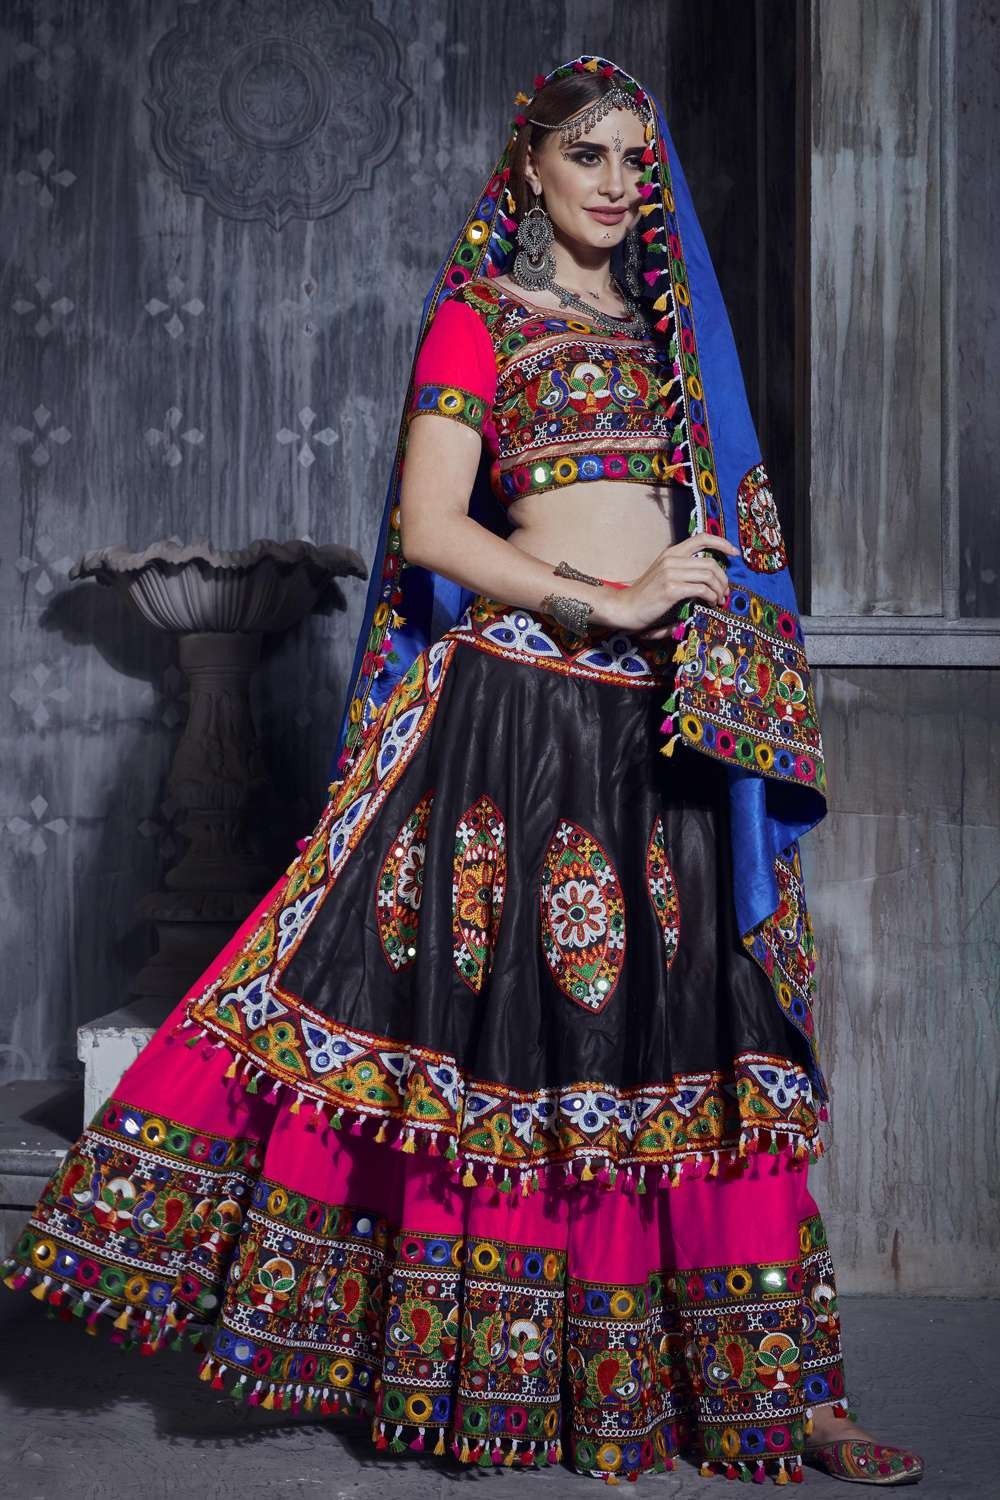 https://media.shopkund.com/media/catalog/product/cache/3/image/9df78eab33525d08d6e5fb8d27136e95/a/c/acu5542-1-pink-lehenga-choli-in-art-silk-with-embroidered-lc5724.jpg